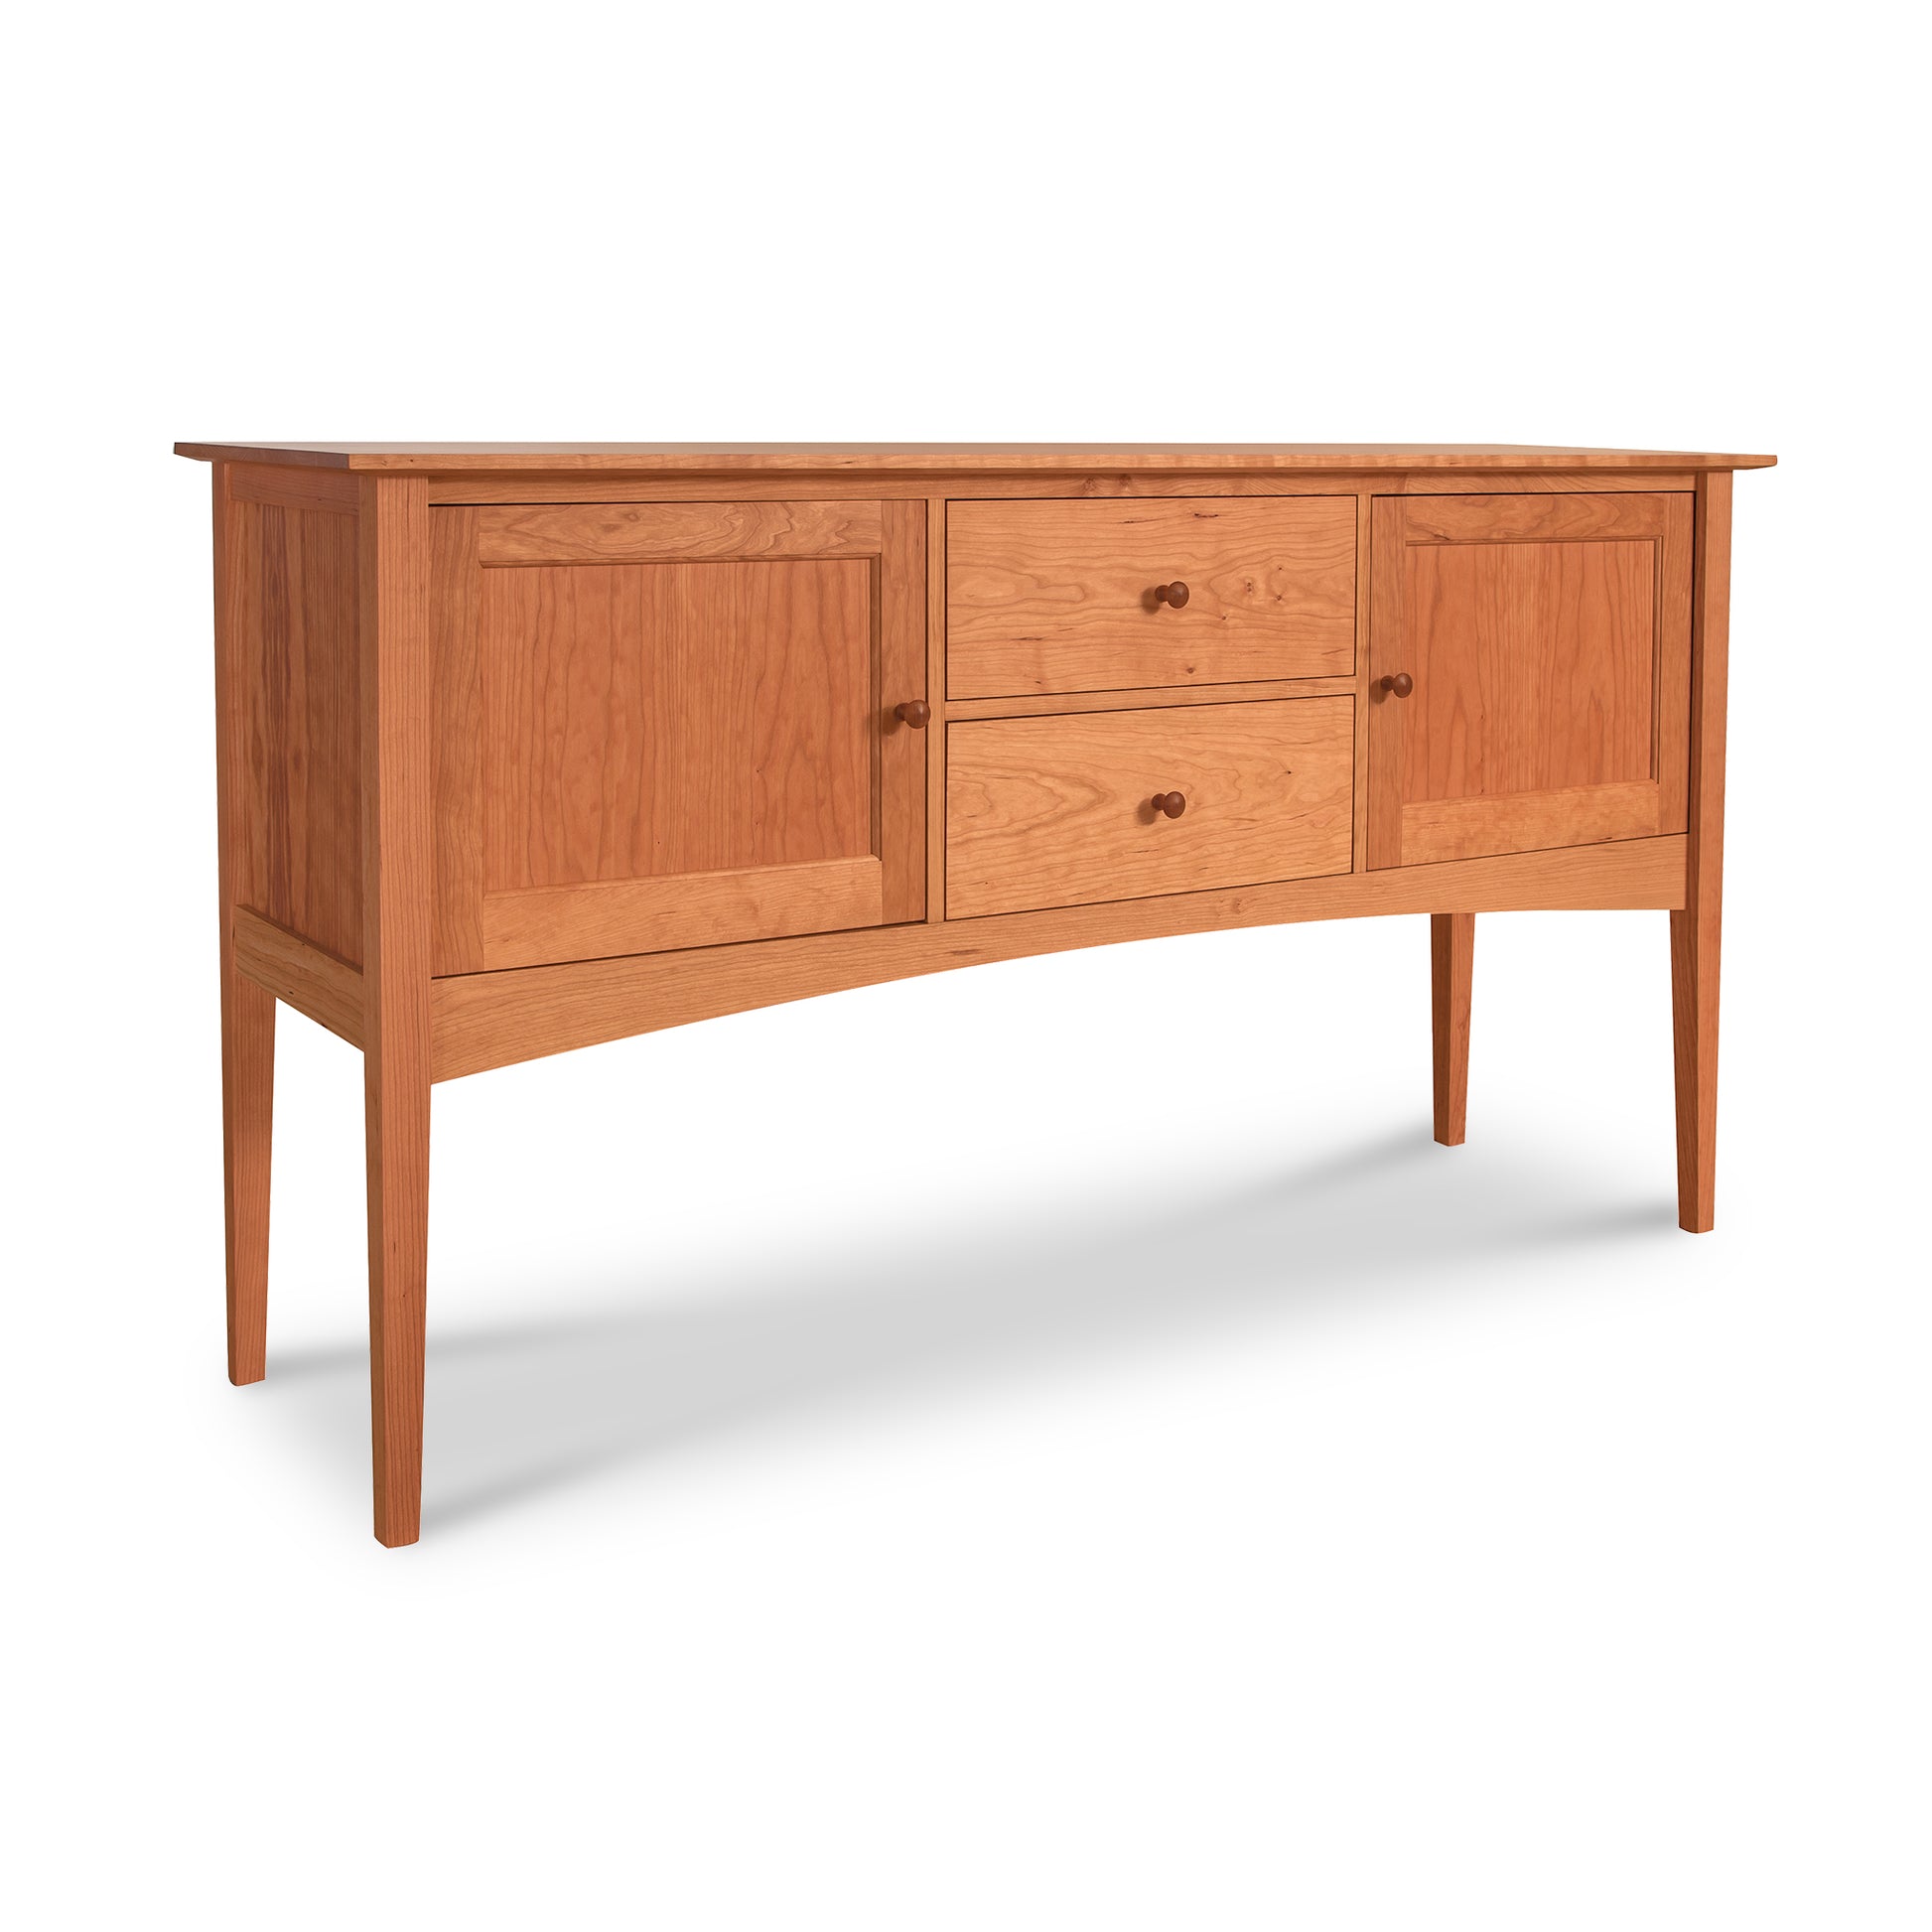 A Maple Corner Woodworks American Shaker Hunt Board wooden sideboard with two drawers.